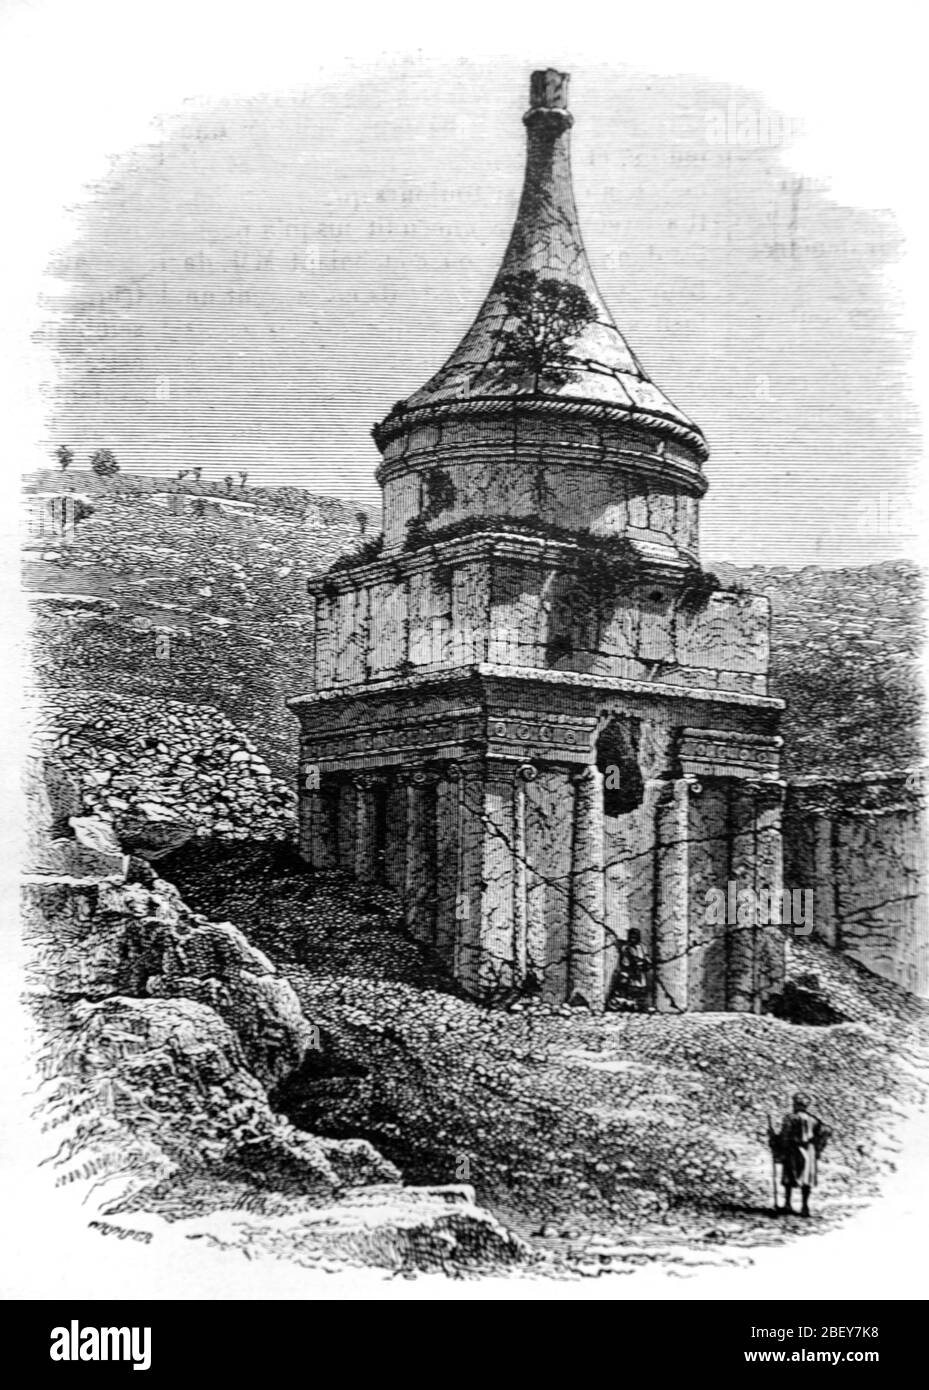 Tomb of Absalom, Absalom's Tomb or Absalom's Pillar, an Ancient Rock-Cut Tomb in Kidron Valley Jerusalem Israel. Vintage or Old Illustration or Engraving 1888 Stock Photo